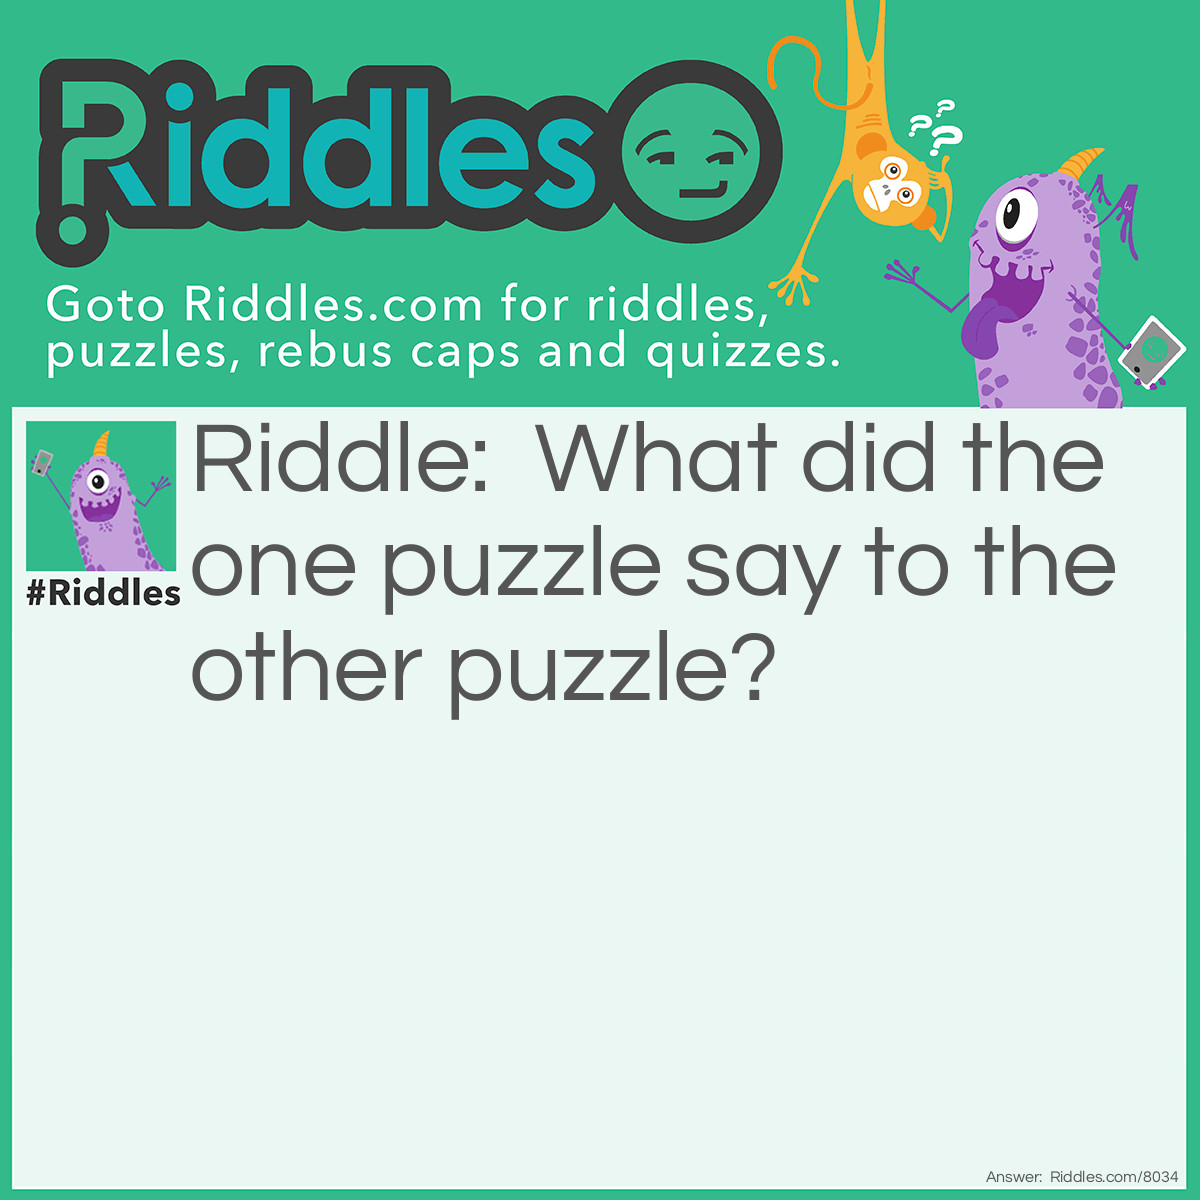 Riddle: What did the one puzzle say to the other puzzle? Answer: I don’t come in peace, I come in pieces!